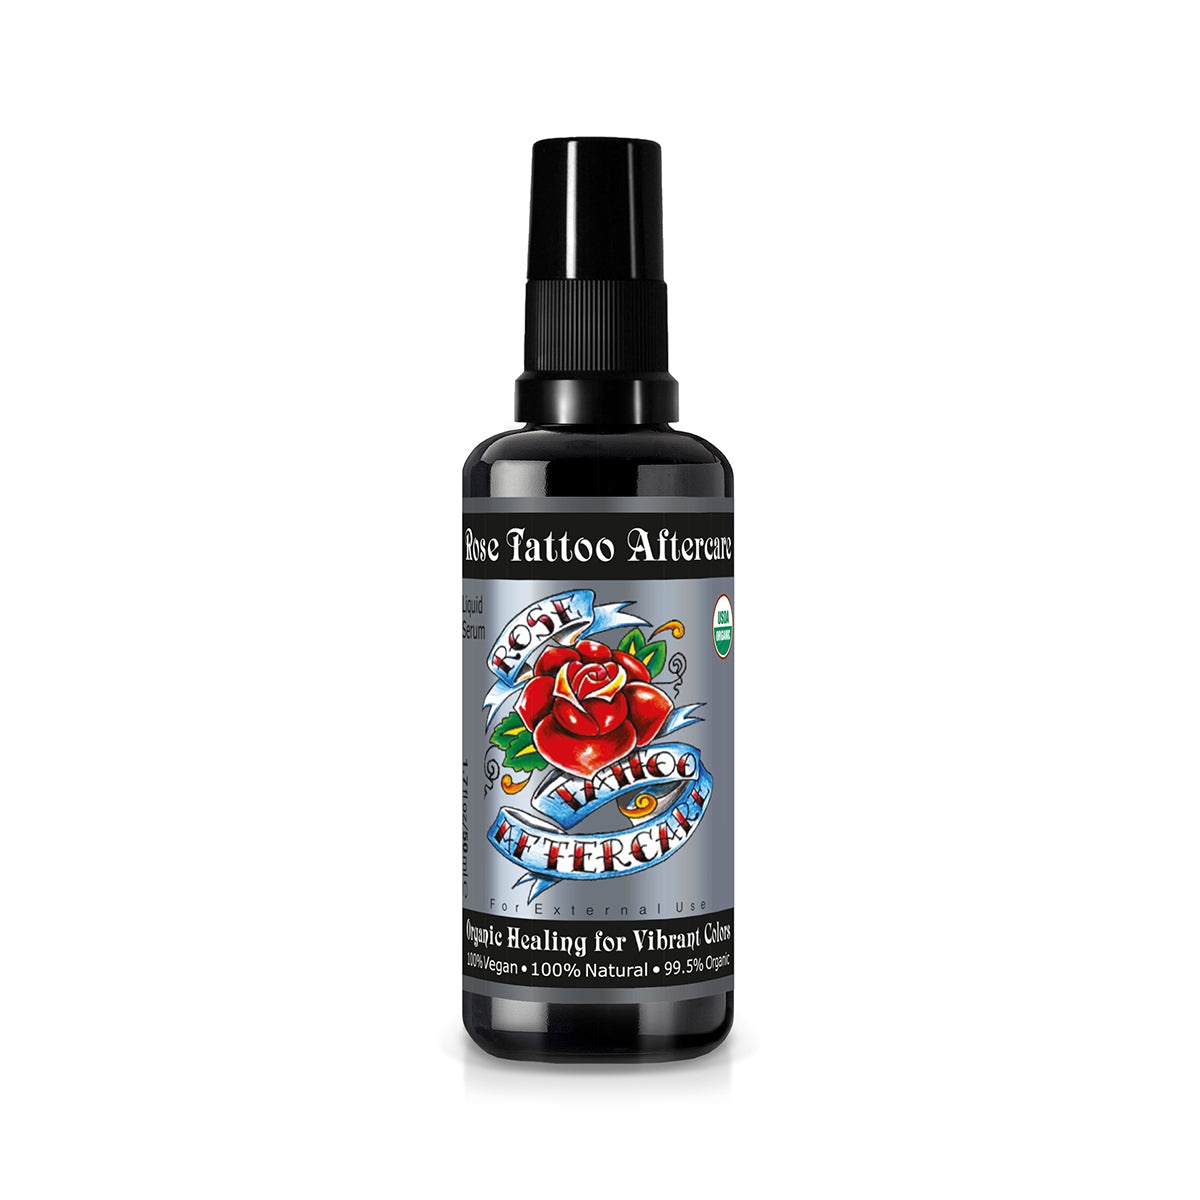 Rose Tattoo Aftercare is a 100% Natural and 97% USDA Certified Organic product. This specially formulated tattoo ointment, infused with the finest organic ingredients, aids in faster healing and superior color protection as compared to any other tattoo healing aid on the market.